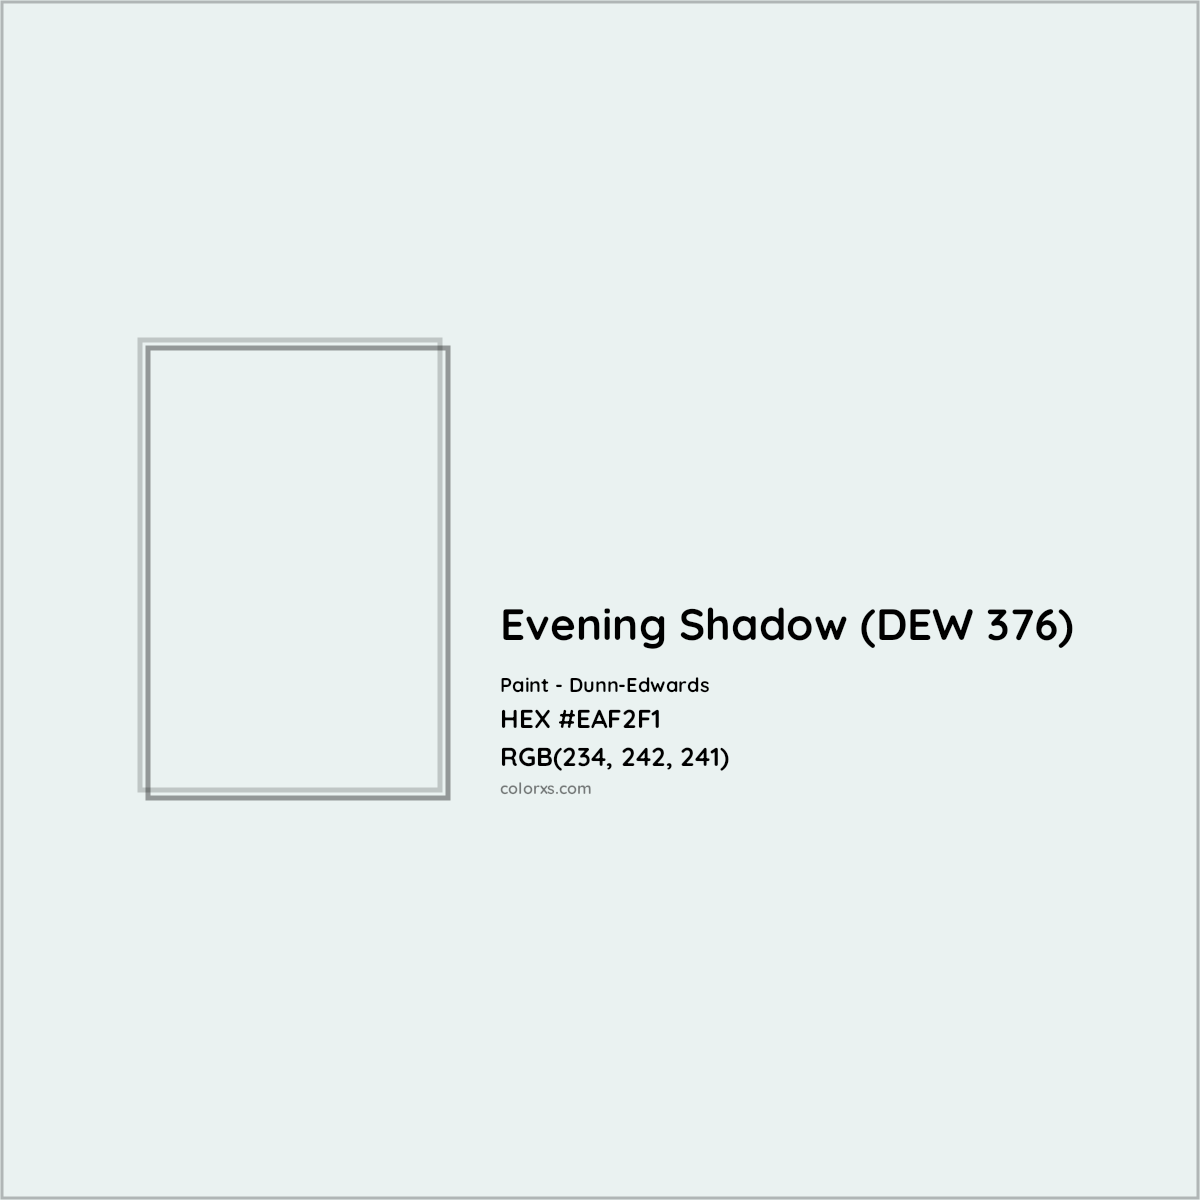 HEX #EAF2F1 Evening Shadow (DEW 376) Paint Dunn-Edwards - Color Code